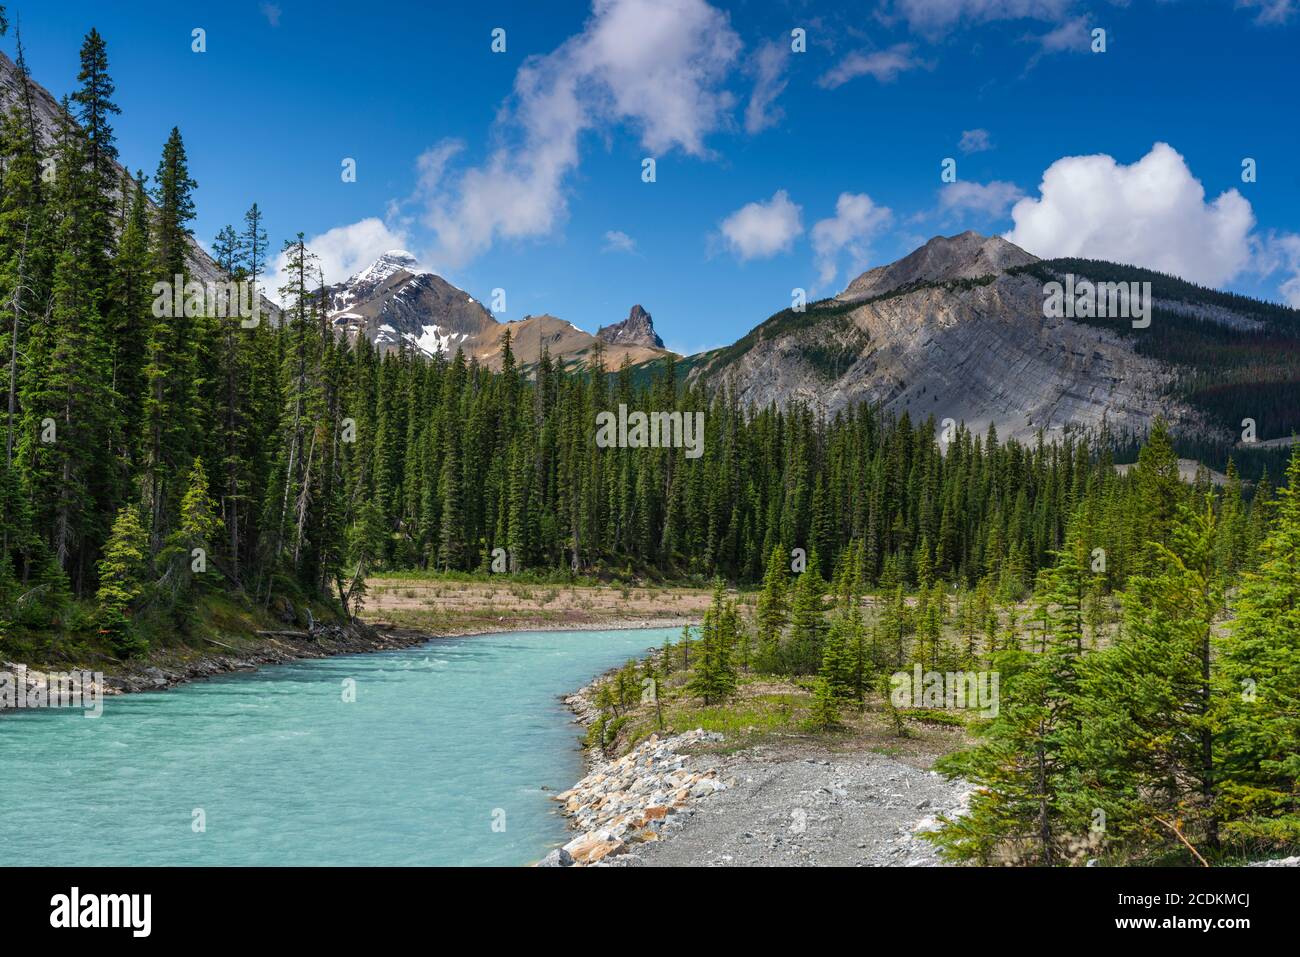 Mountain scenic along the Icefields Parkway, Alberta, Canada. Stock Photo